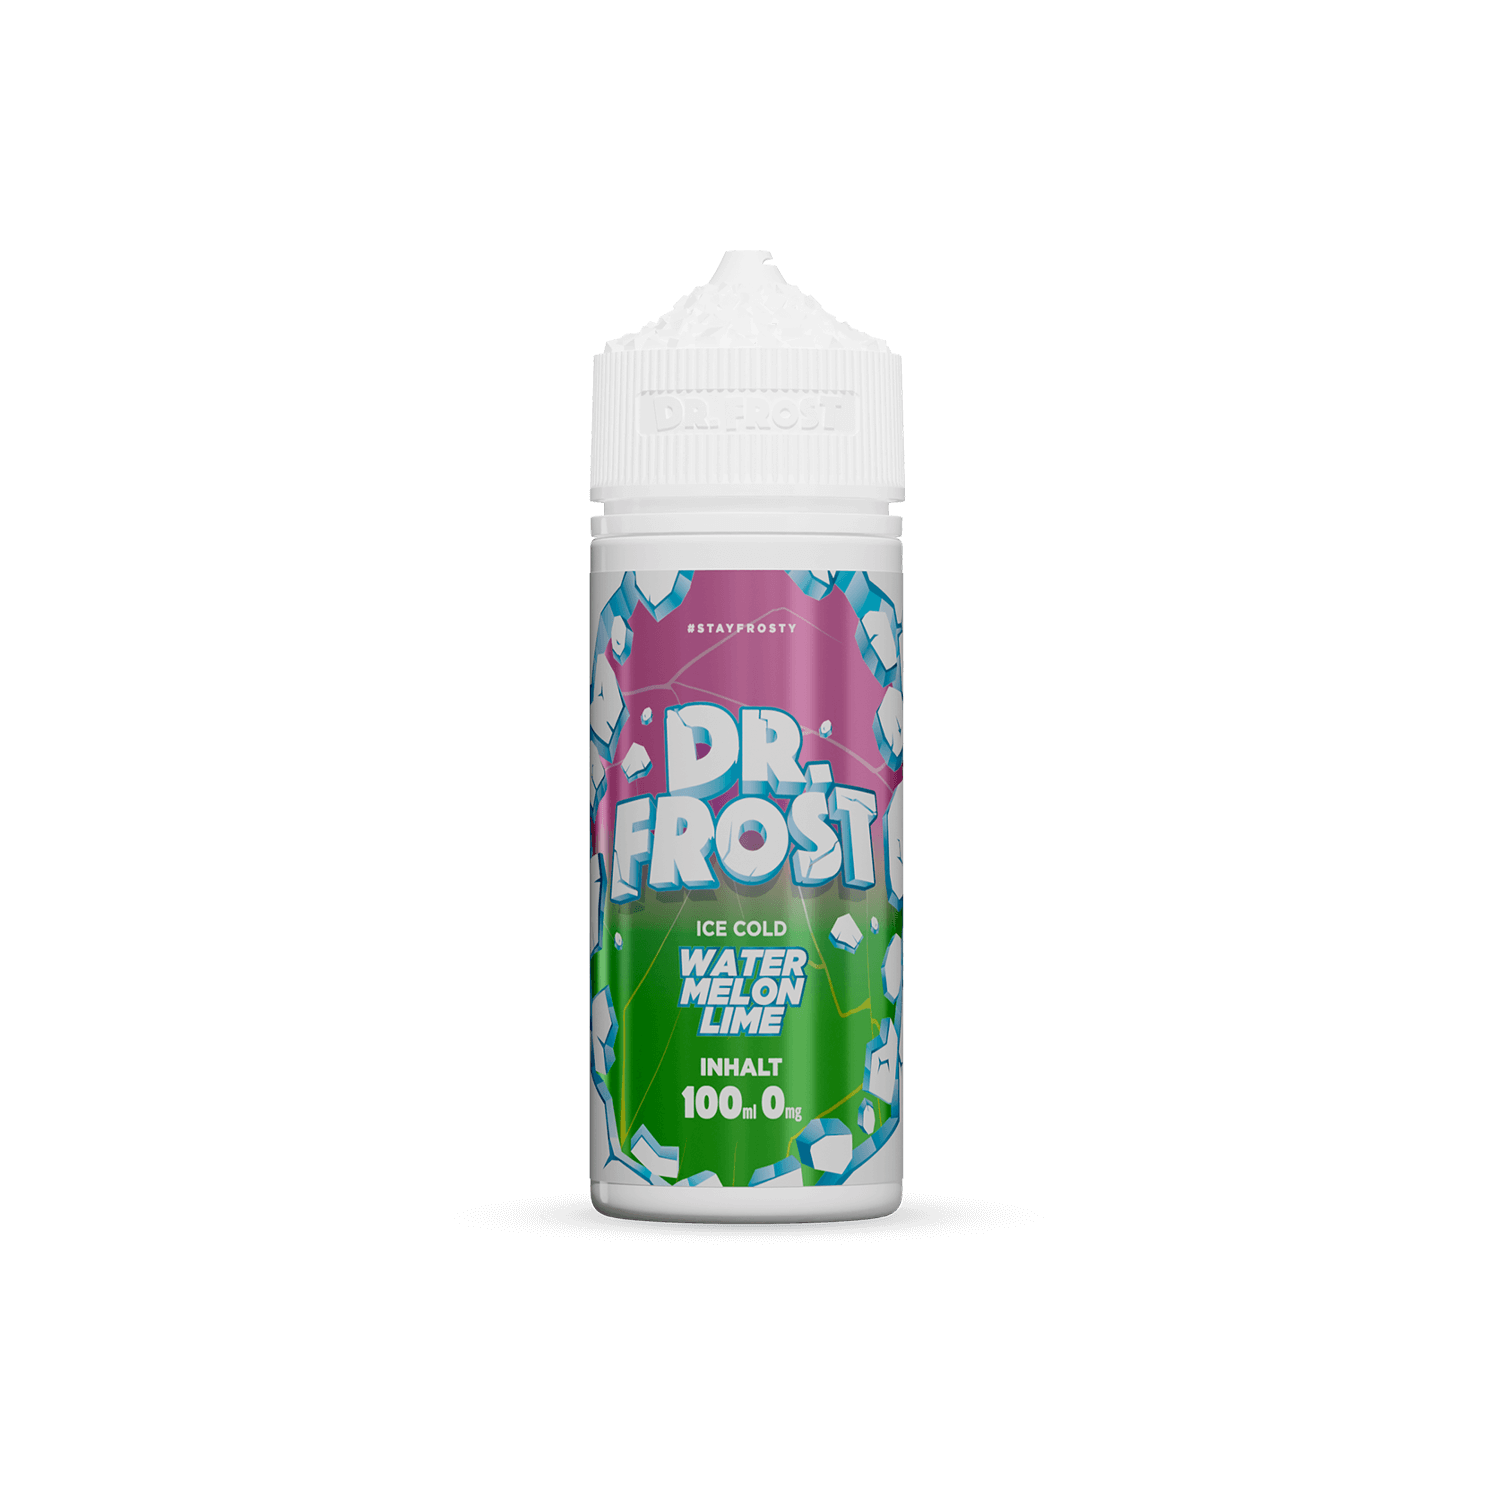 Dr. Frost - Ice Cold - Watermelon Lime 100 ml Shortfill Liquid